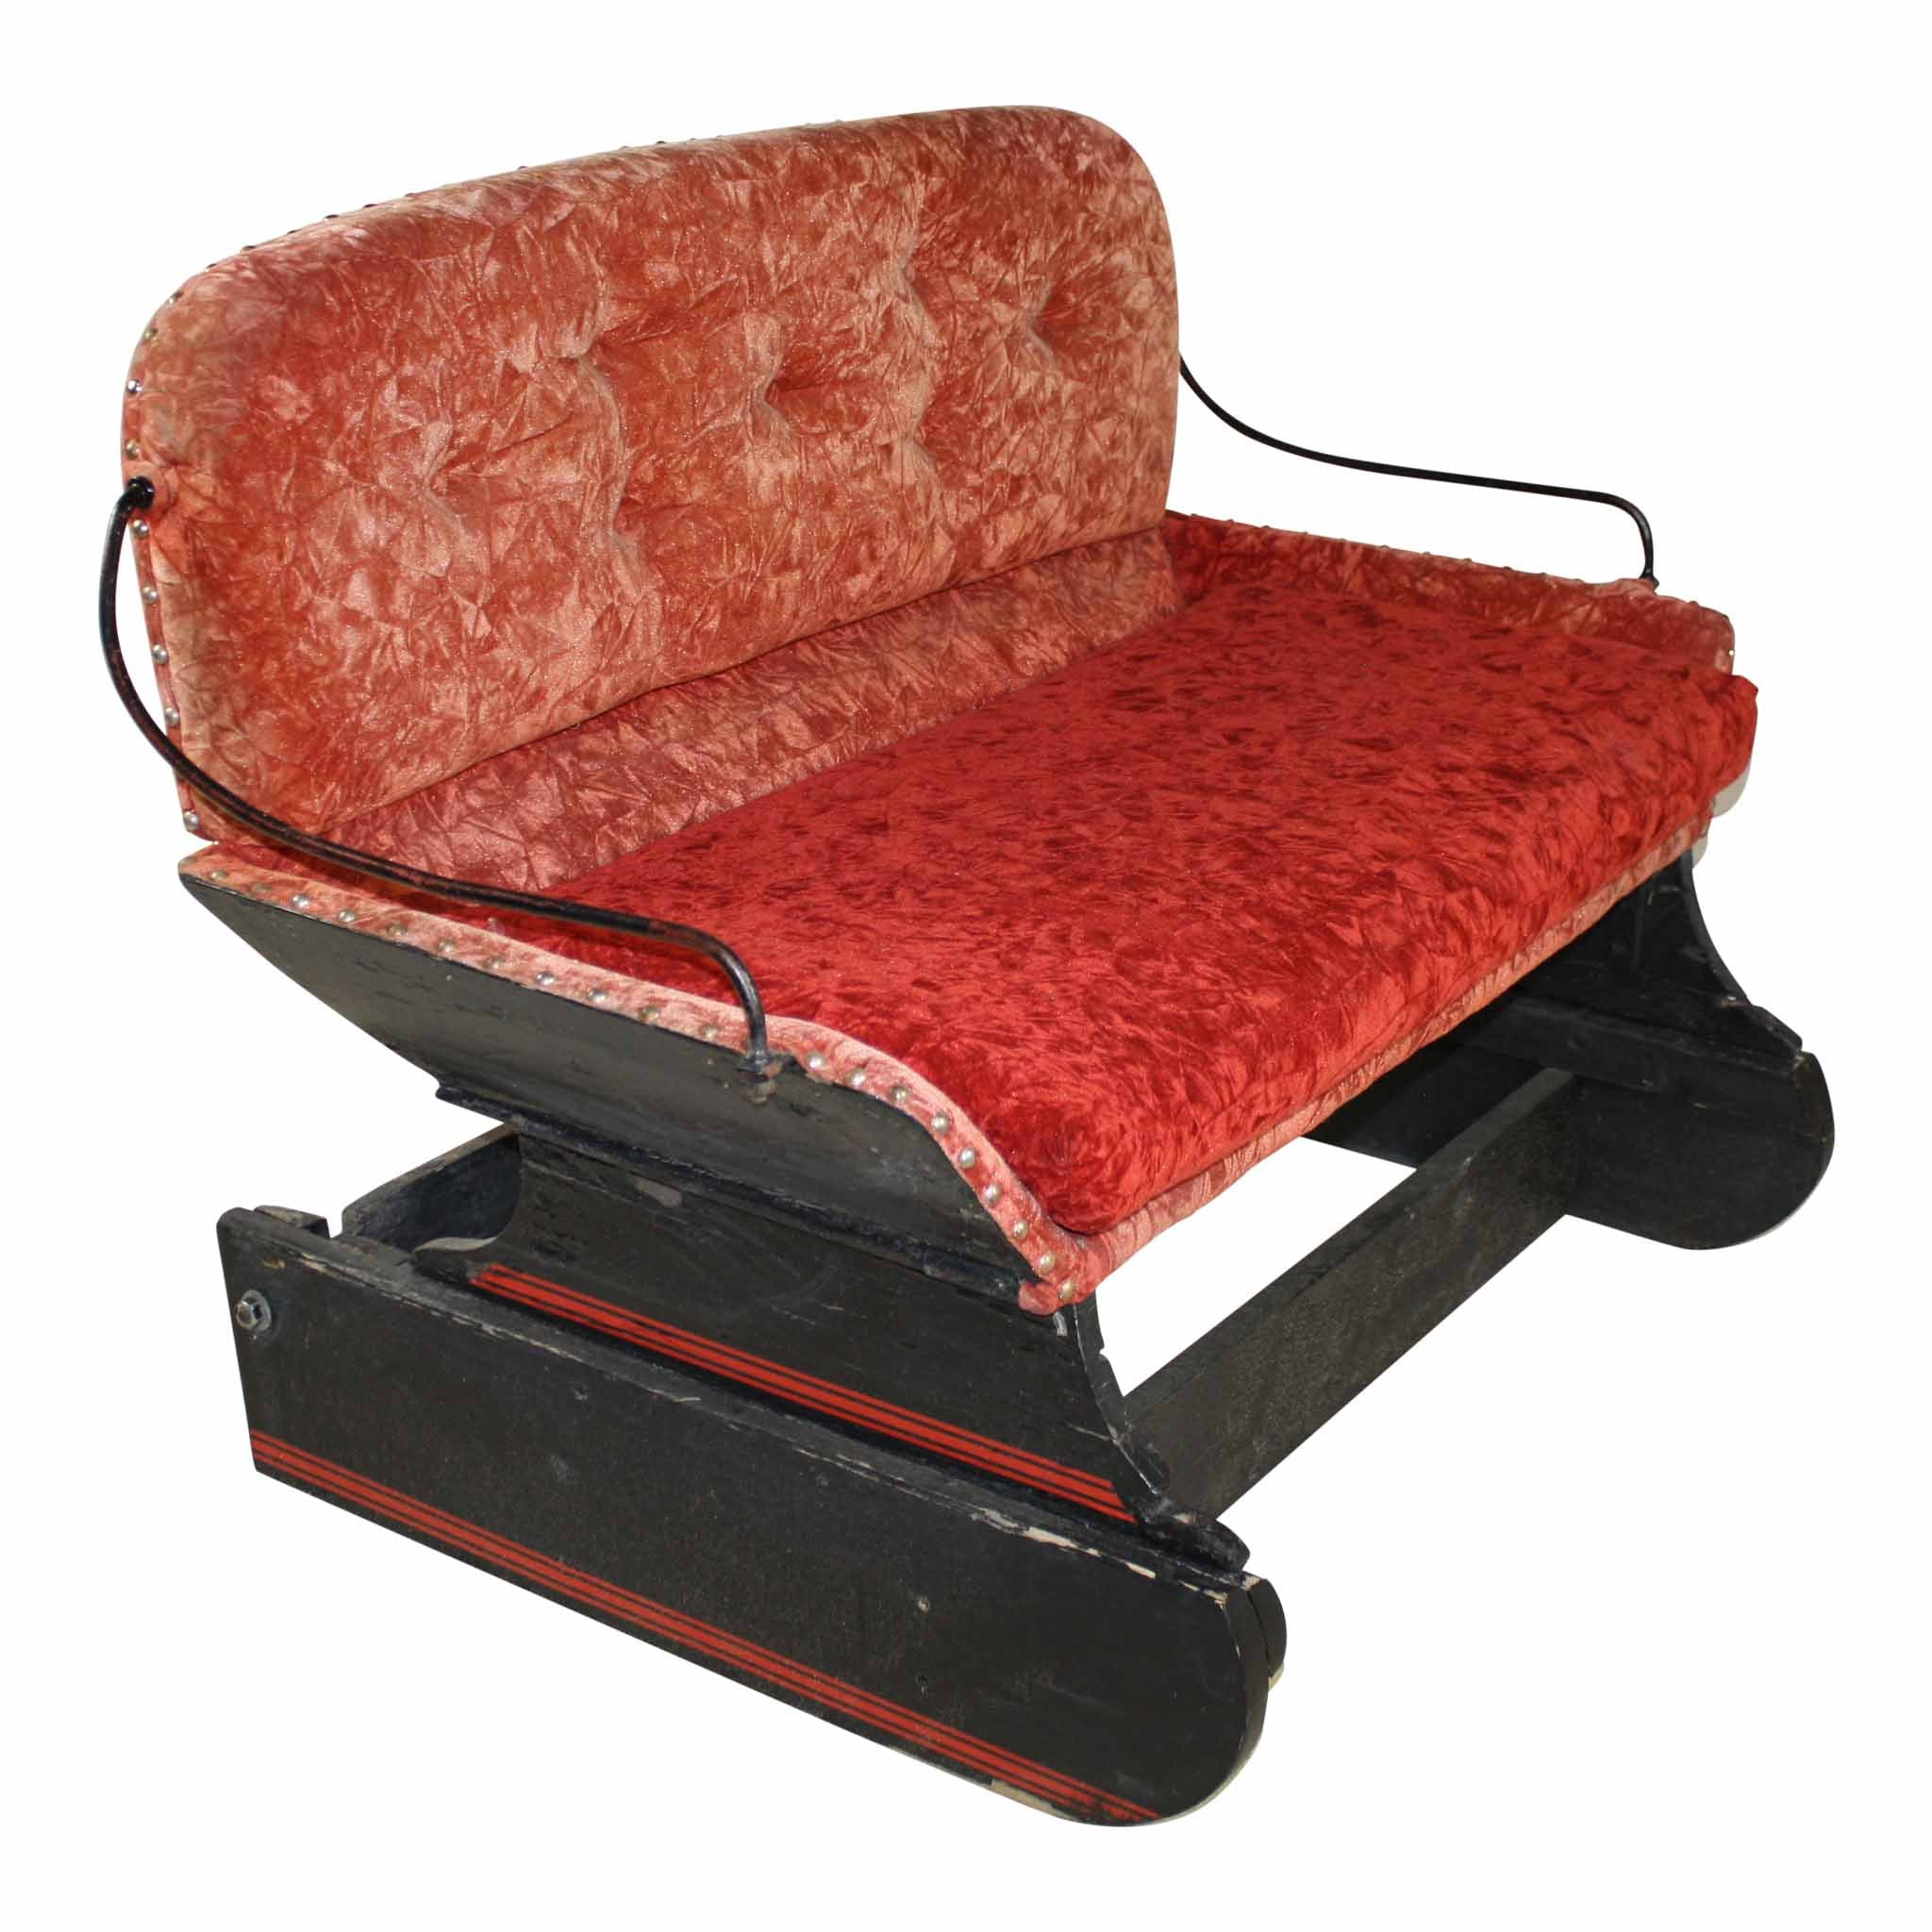 Sleigh Seat Bench-Red